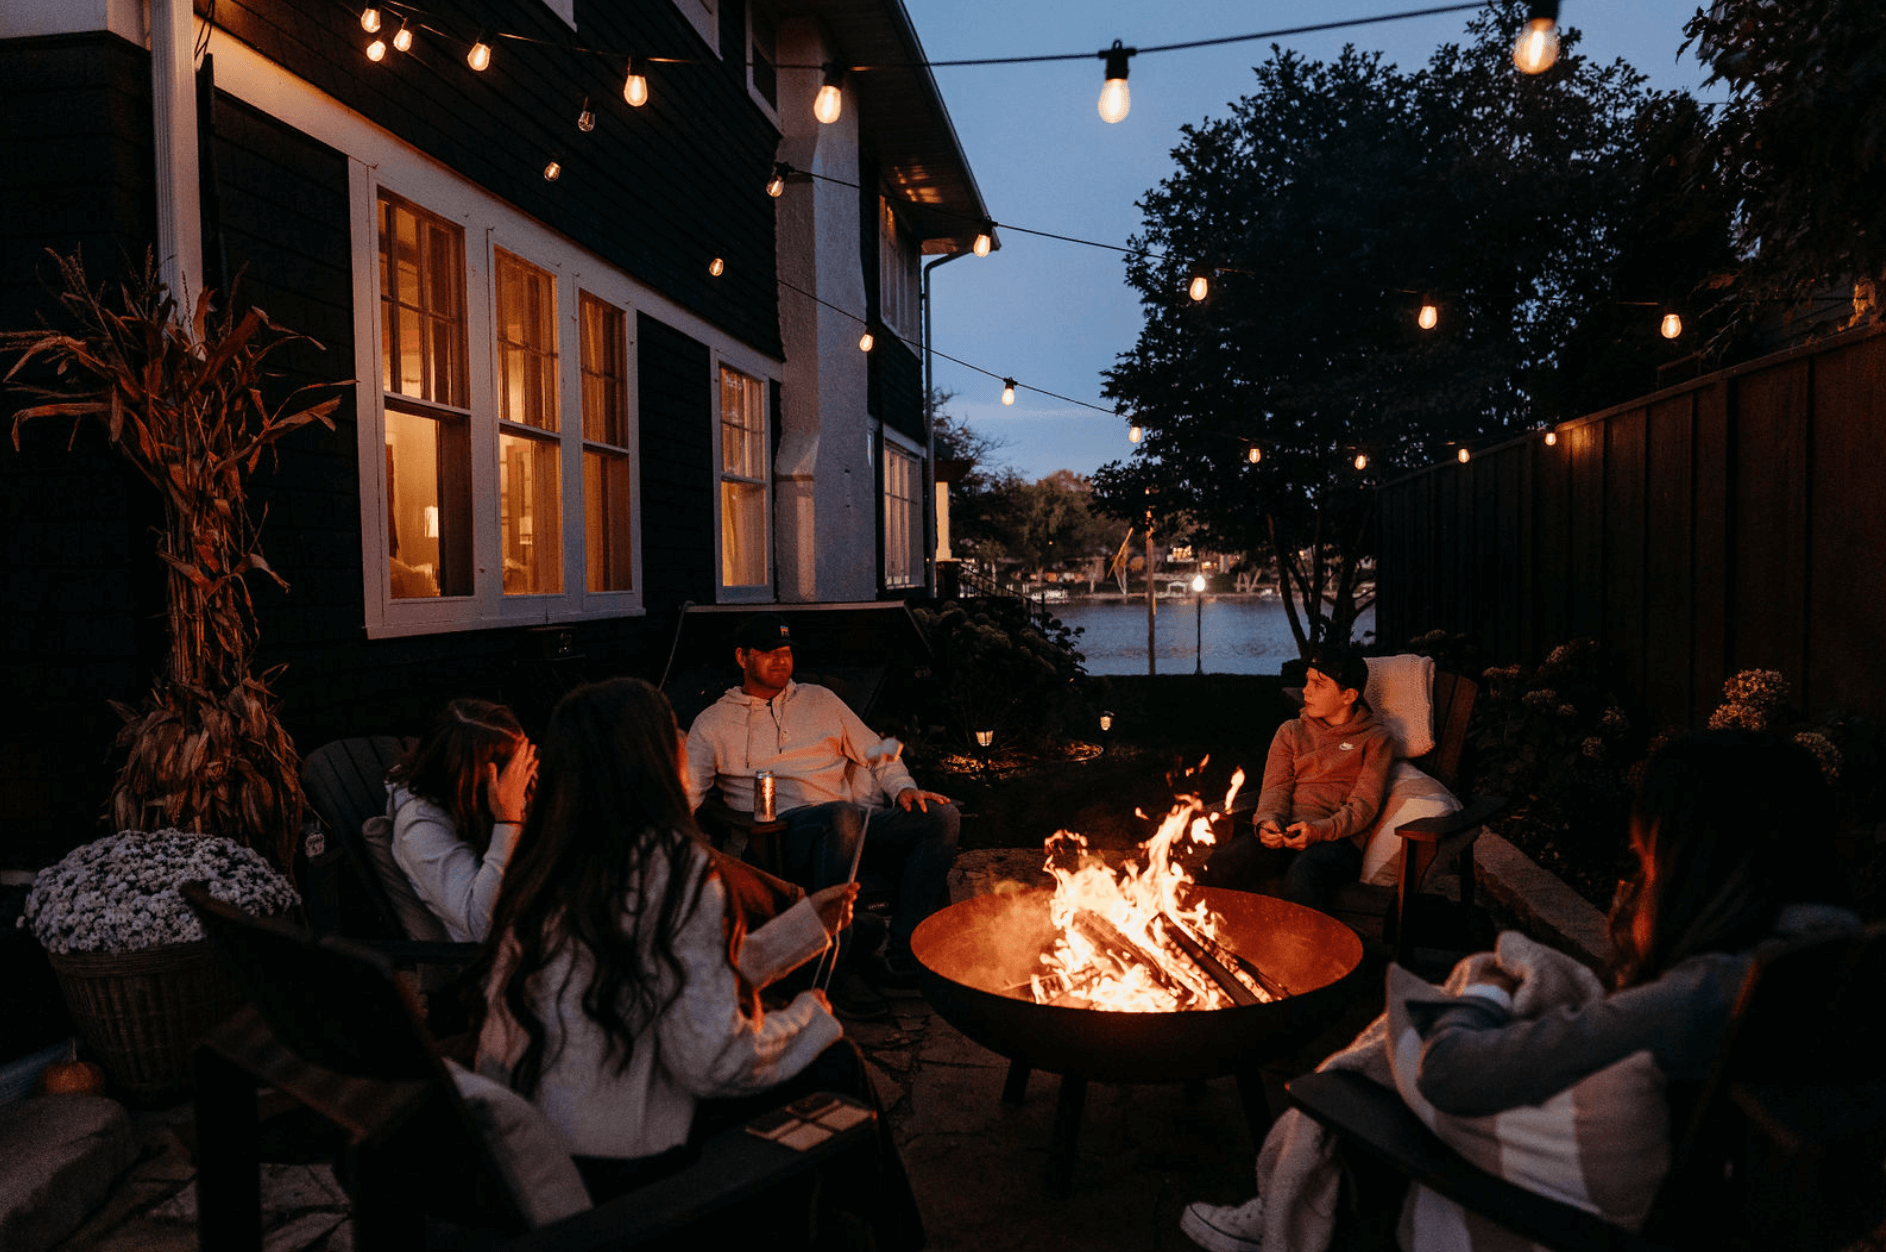 people gathered around a fire pit next to a home.